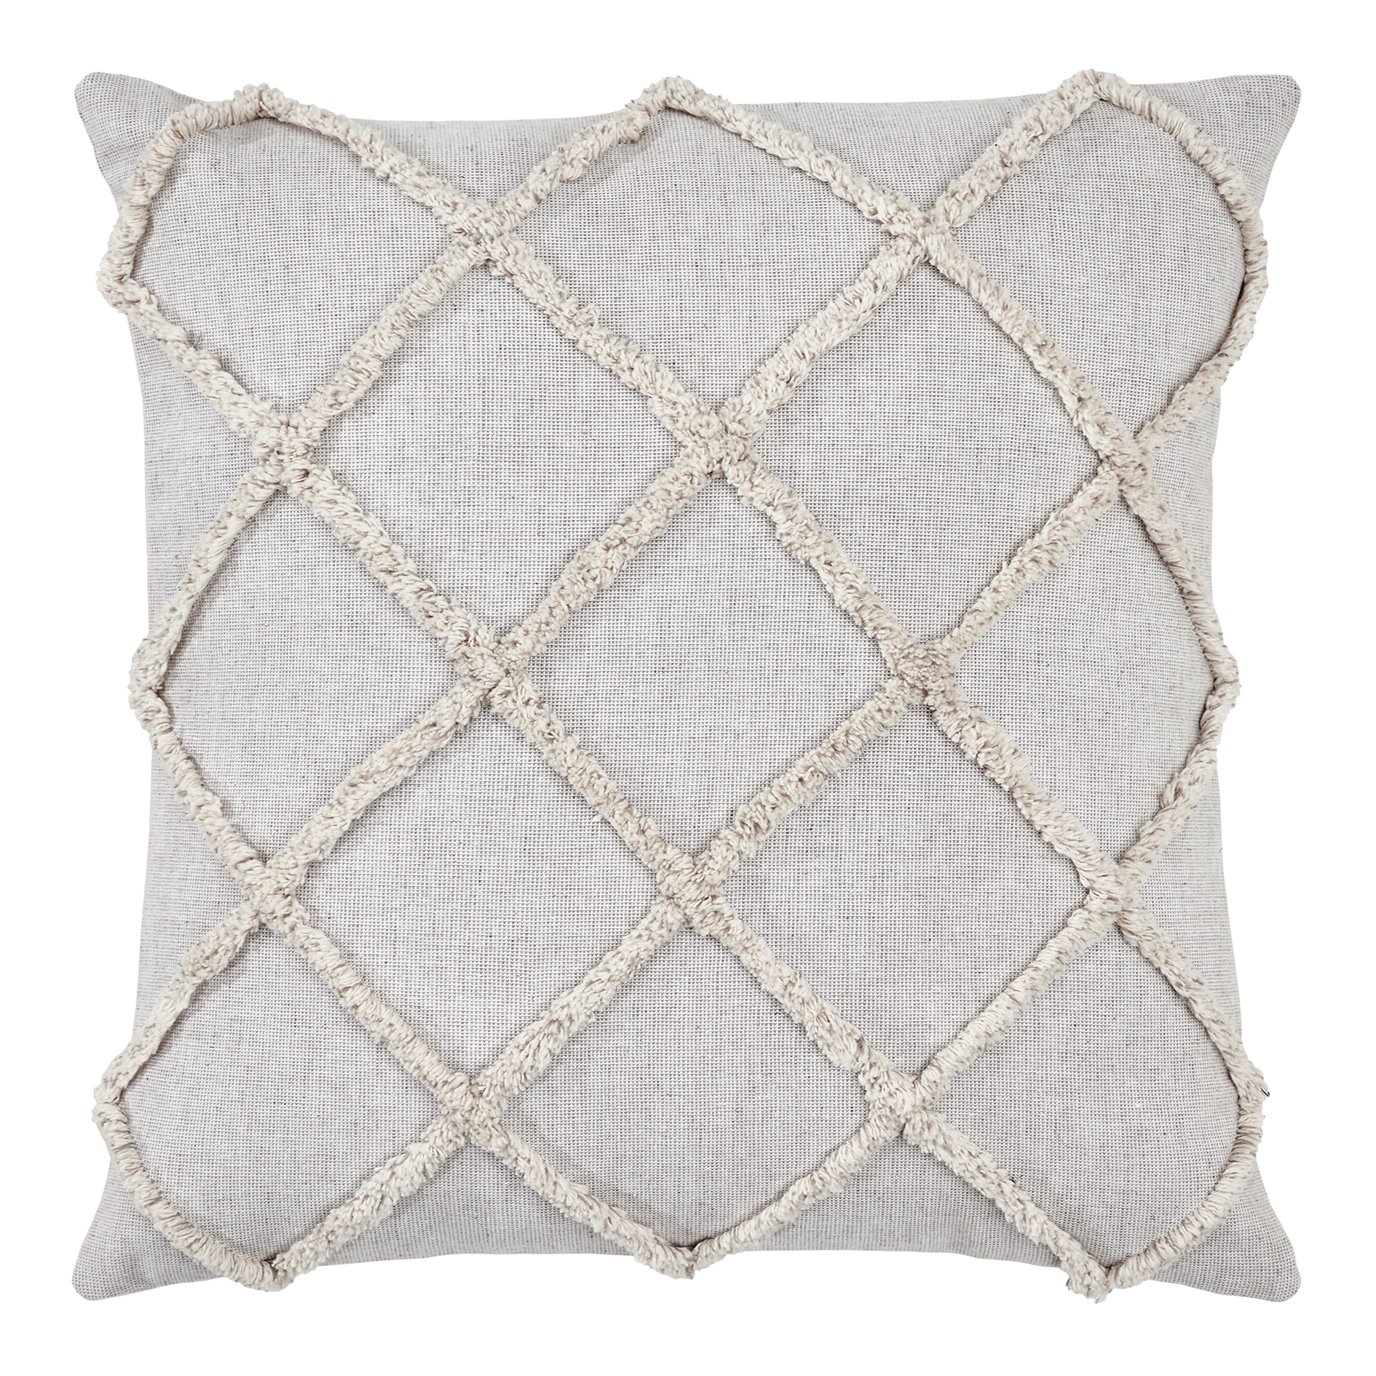 Frayed Lattice Oatmeal Pillow Cover 20x20